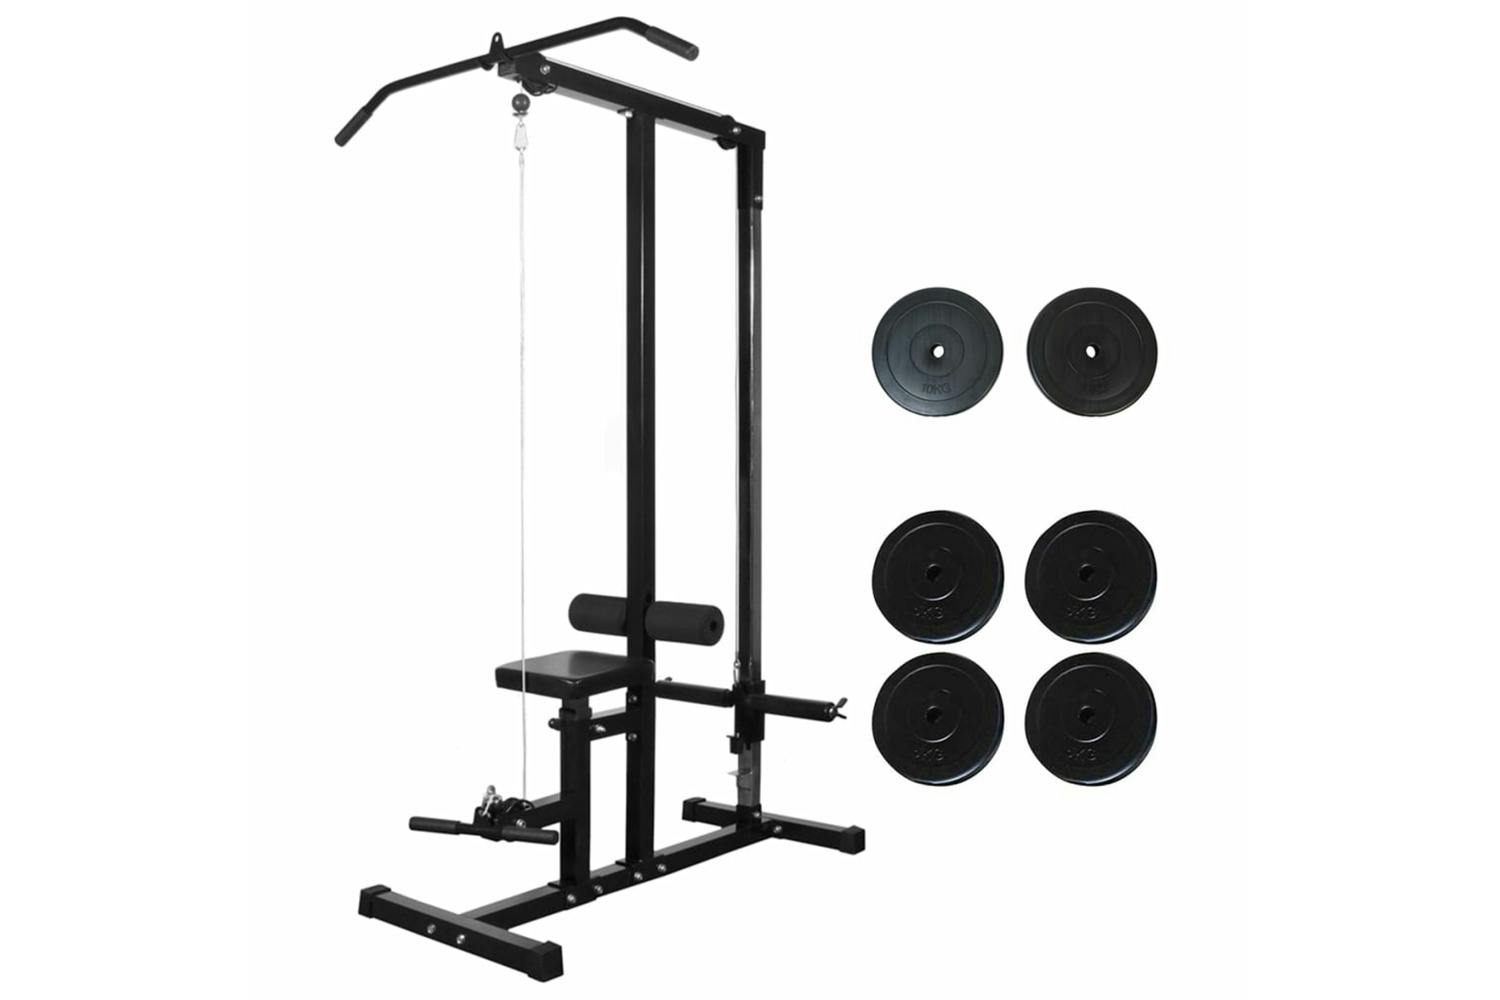 Vidaxl 275356 Power Tower With Weight Plates 40 Kg